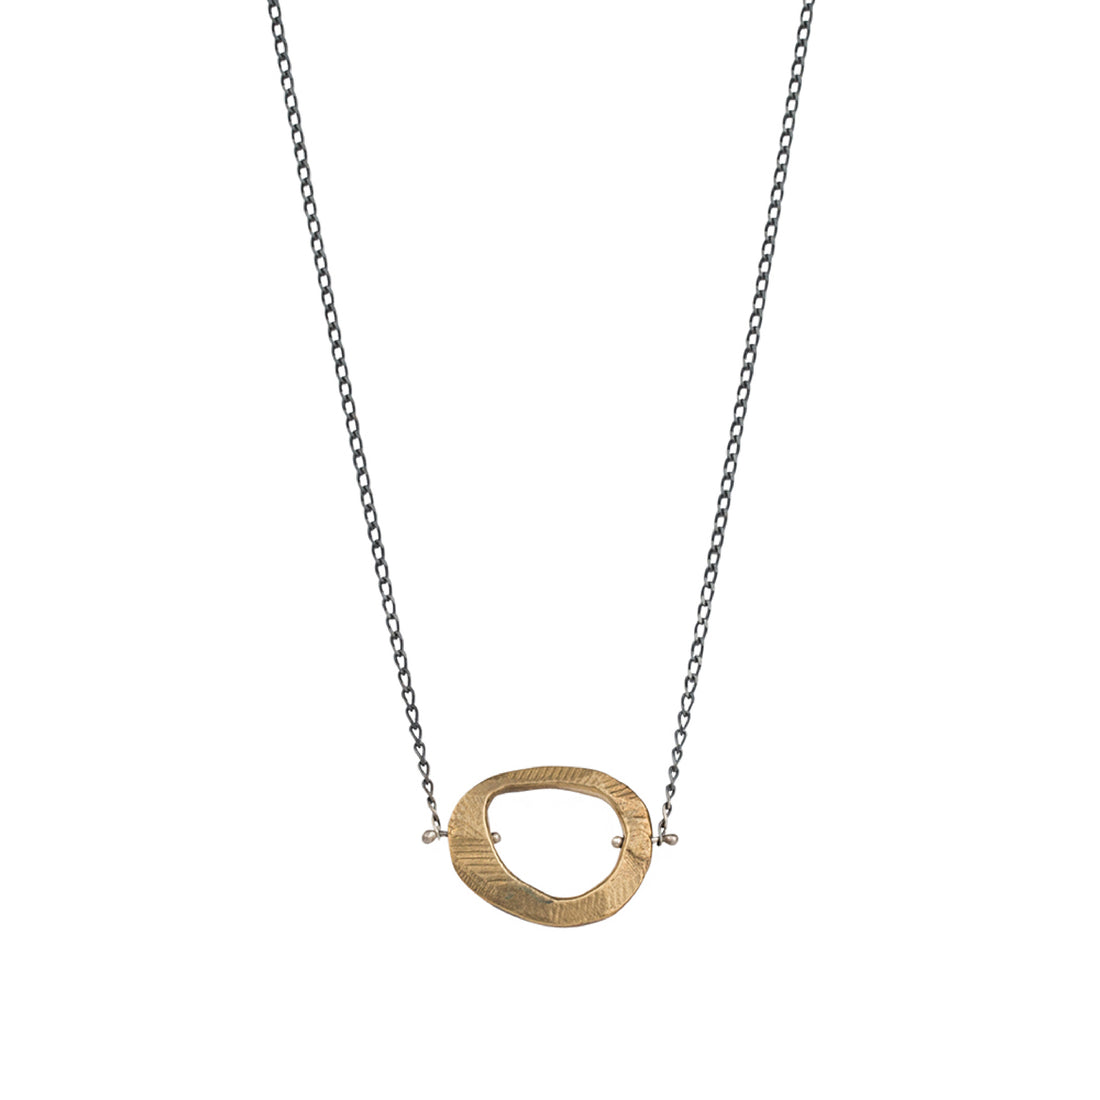 The Skipping Stones Simple Necklace in Bronze is the essential necklace to layer or wear solo for an effortless style. 